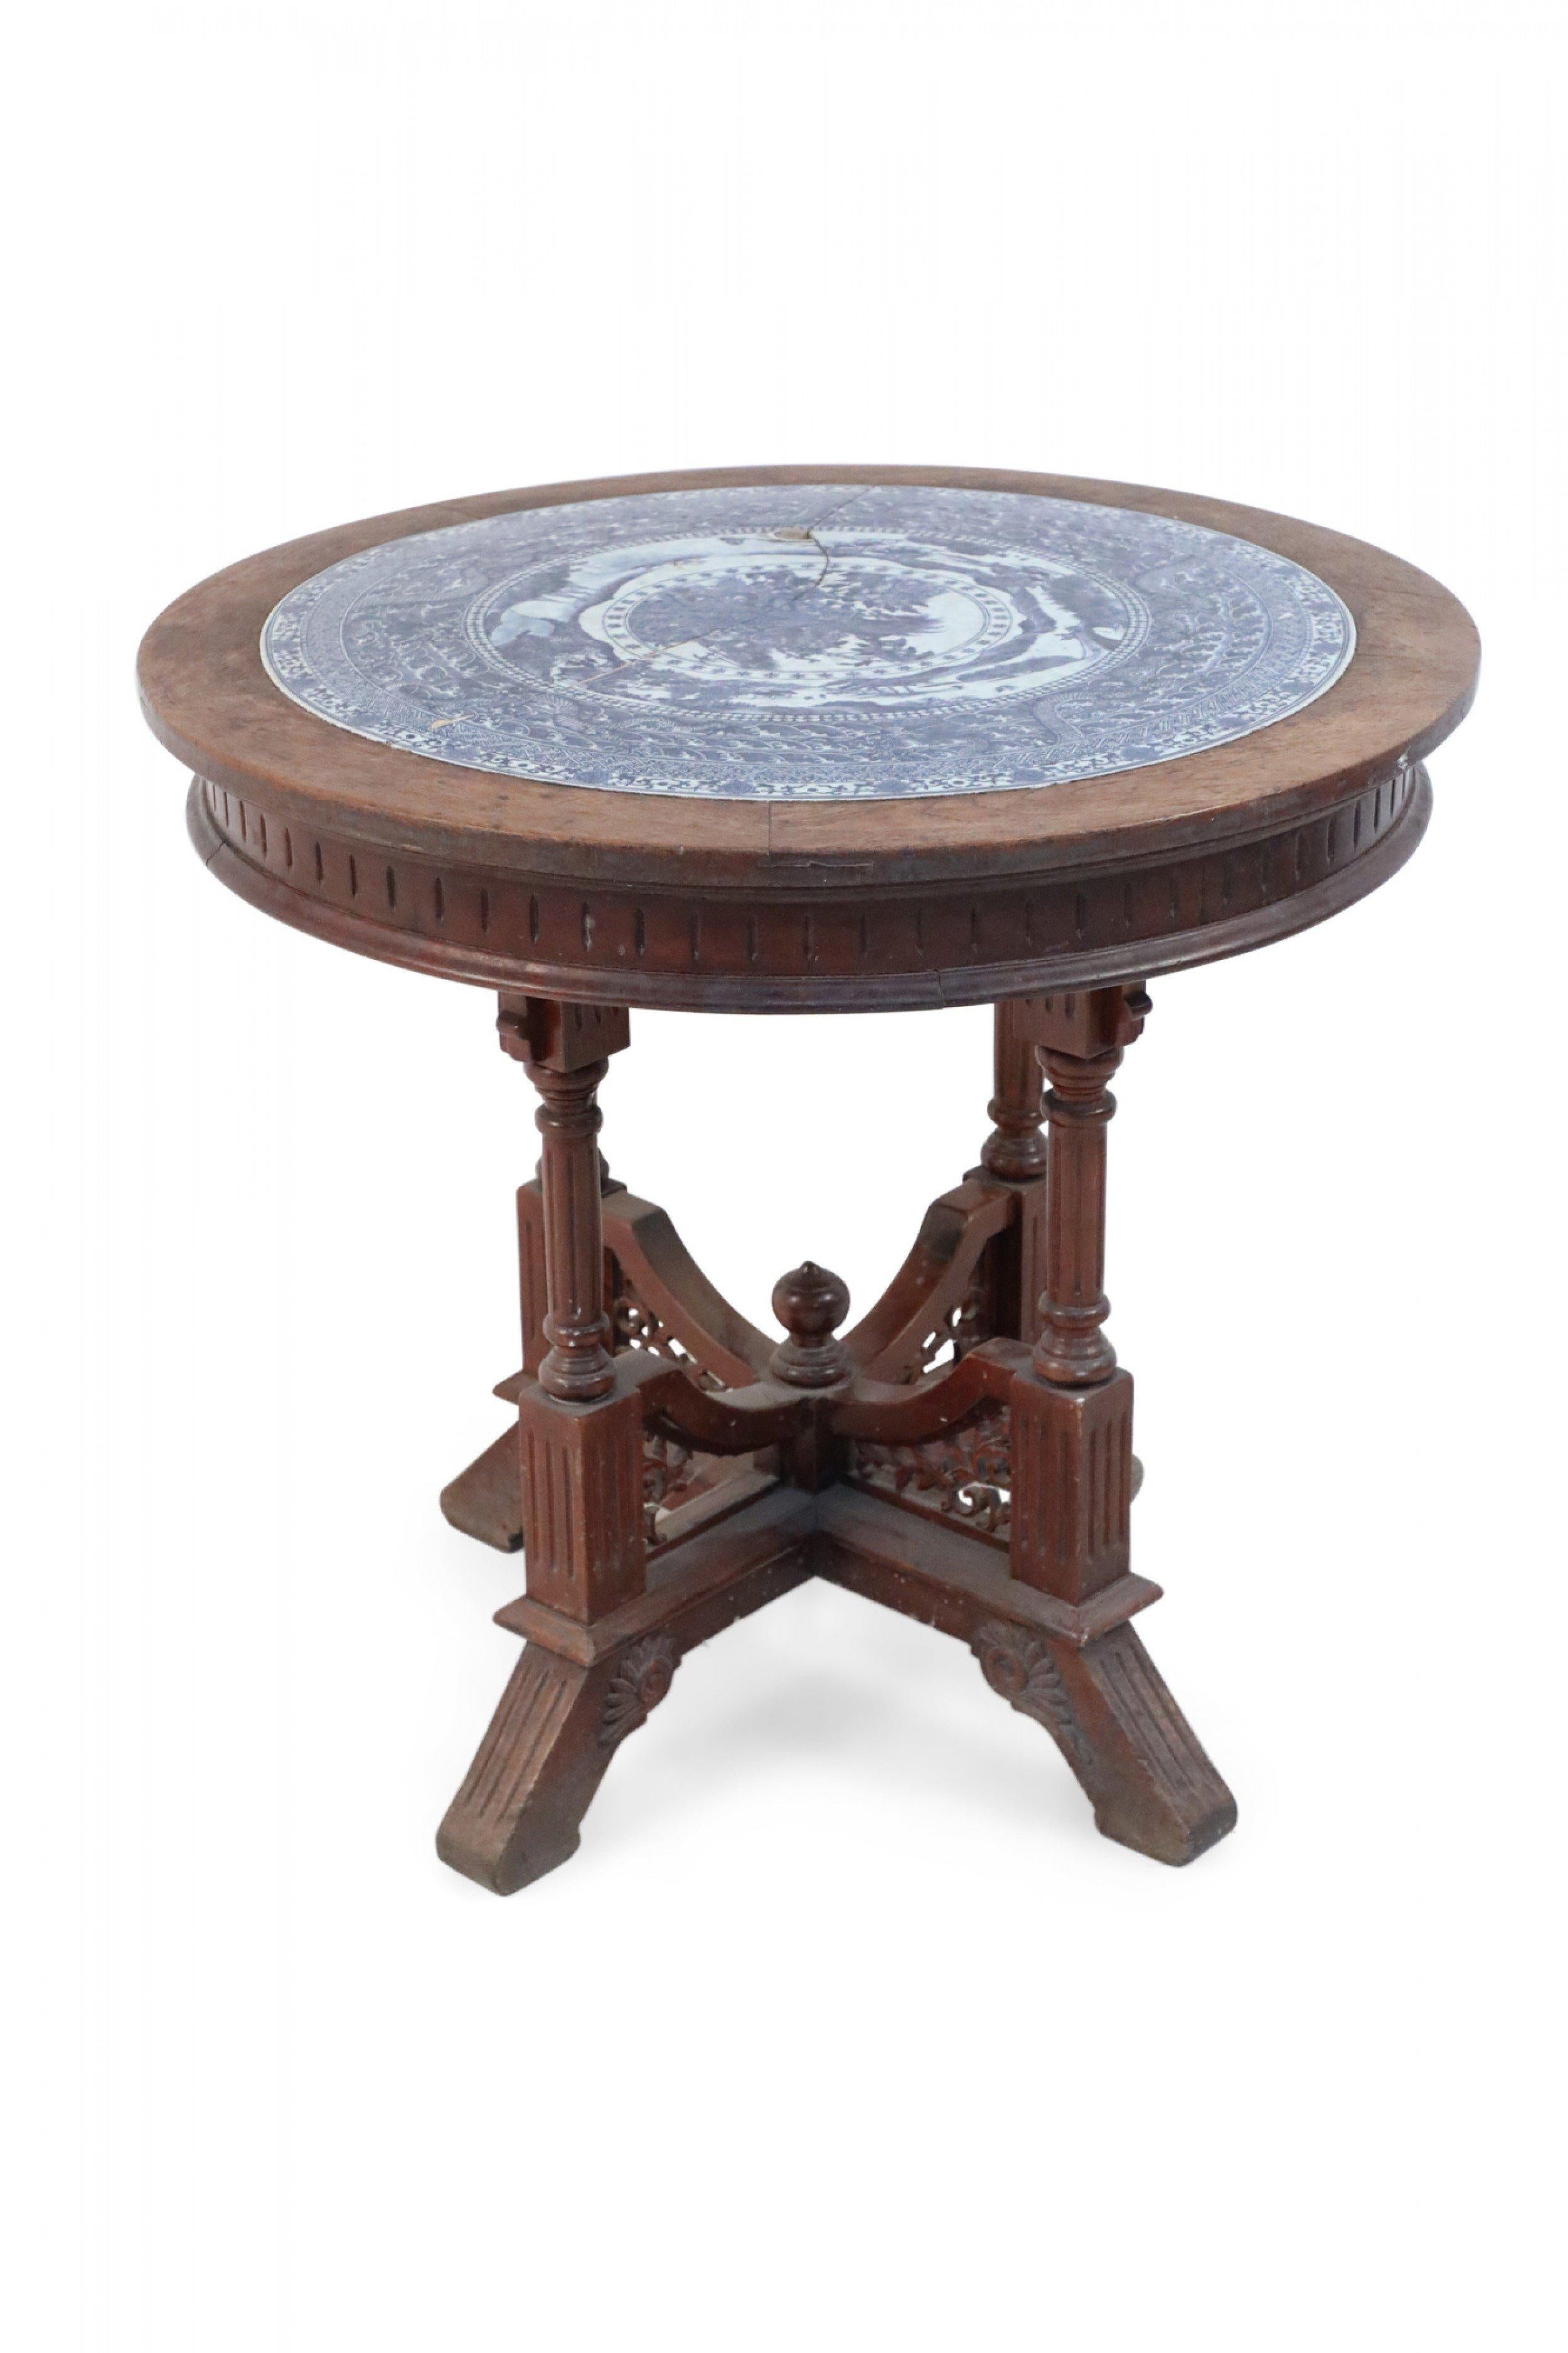 that's a small victorian round wooden table.